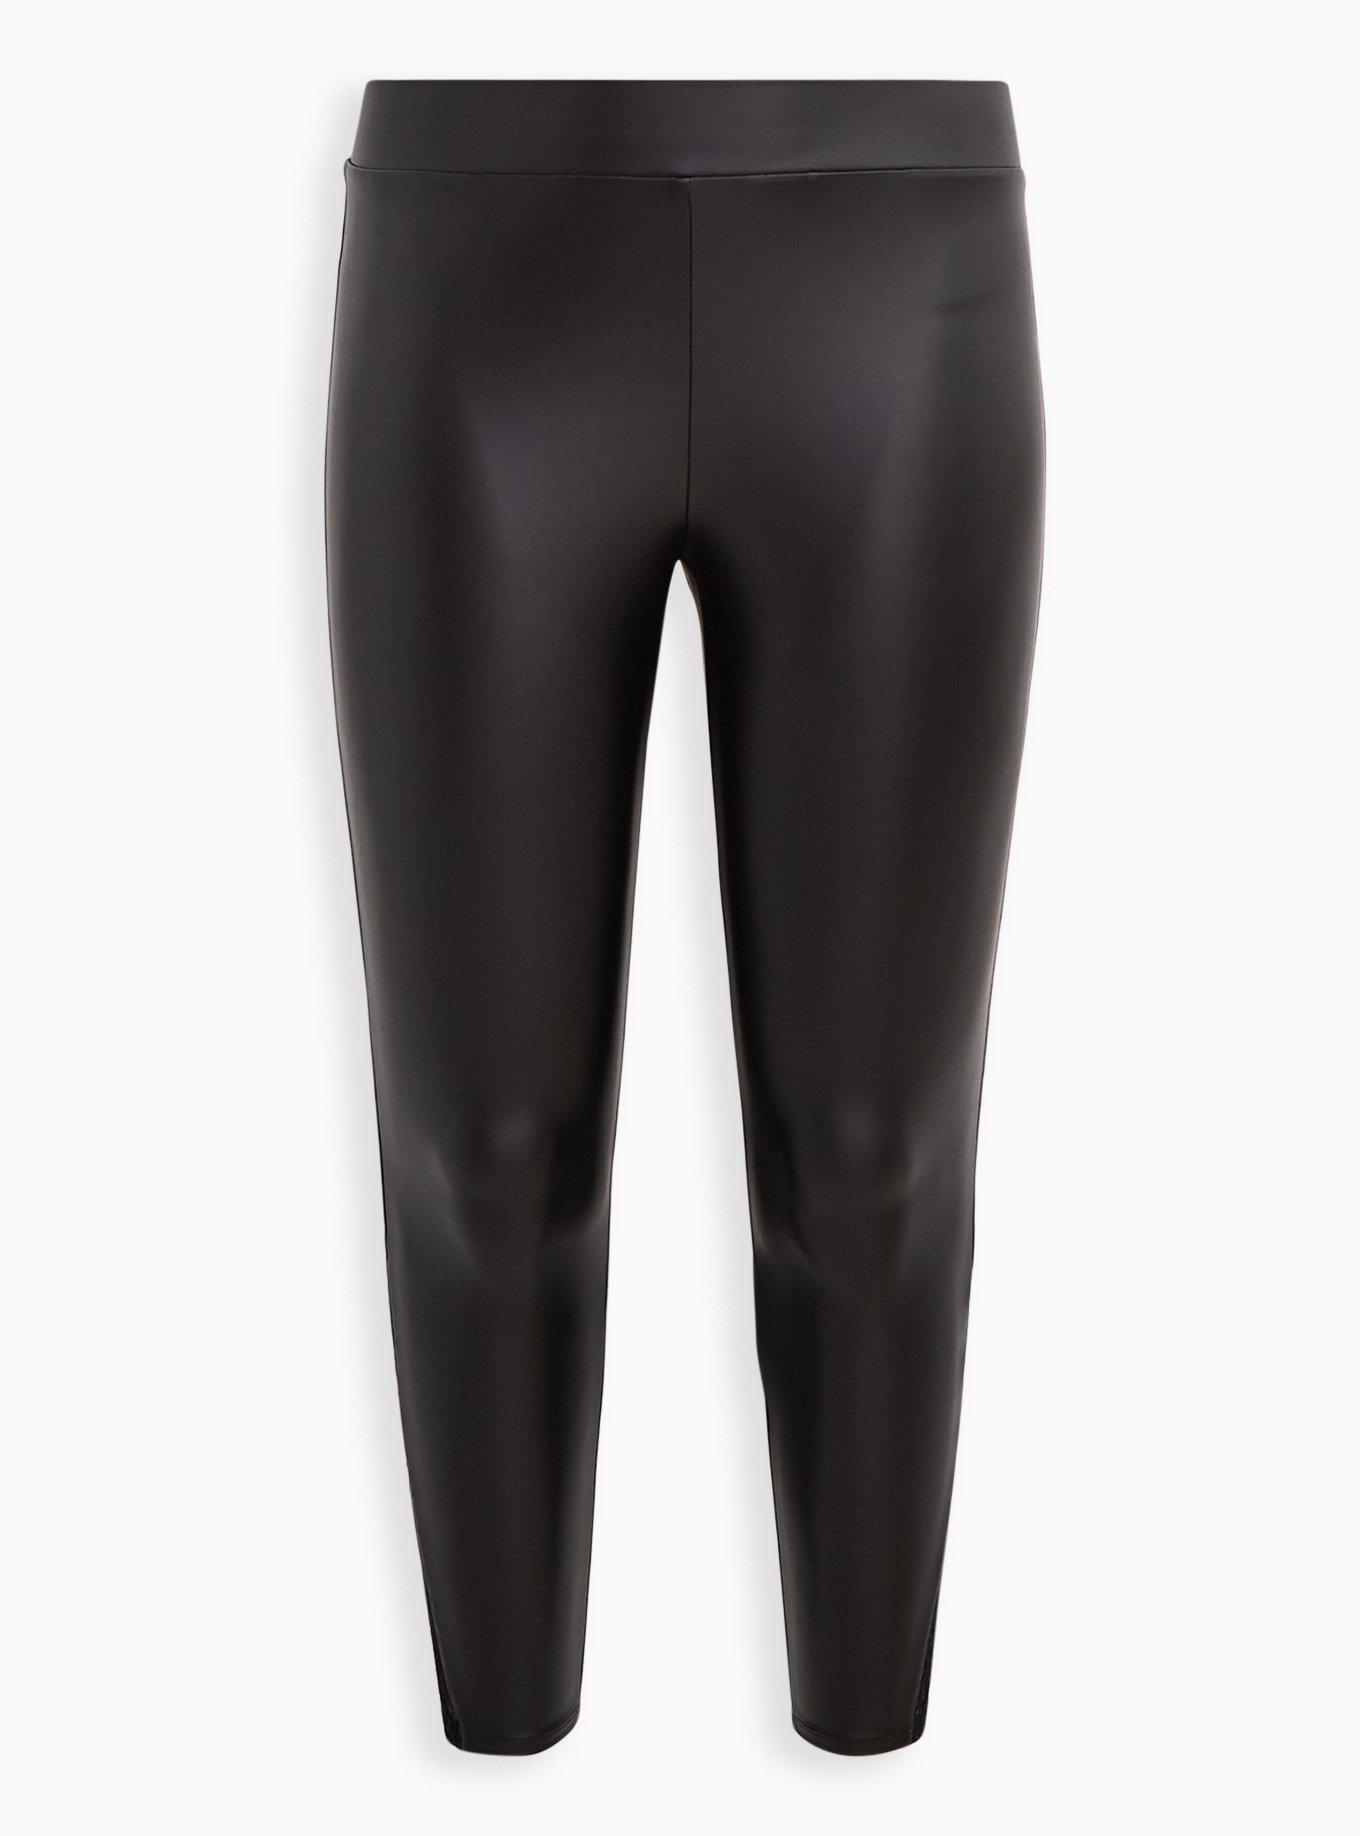 M&S' flattering leather look £25 leggings are back in stock